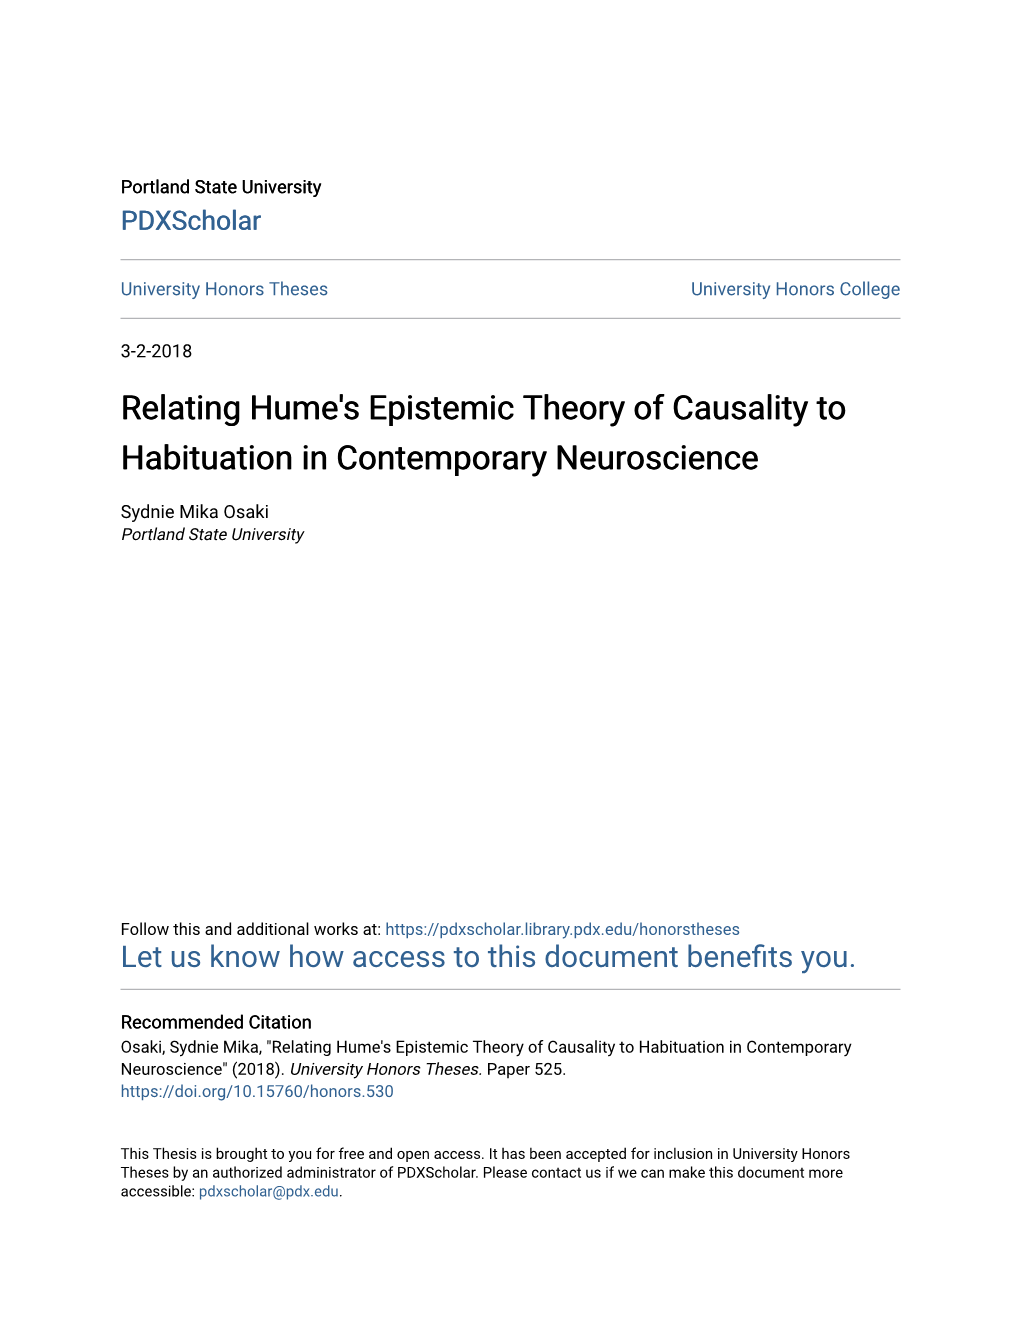 Relating Hume's Epistemic Theory of Causality to Habituation in Contemporary Neuroscience